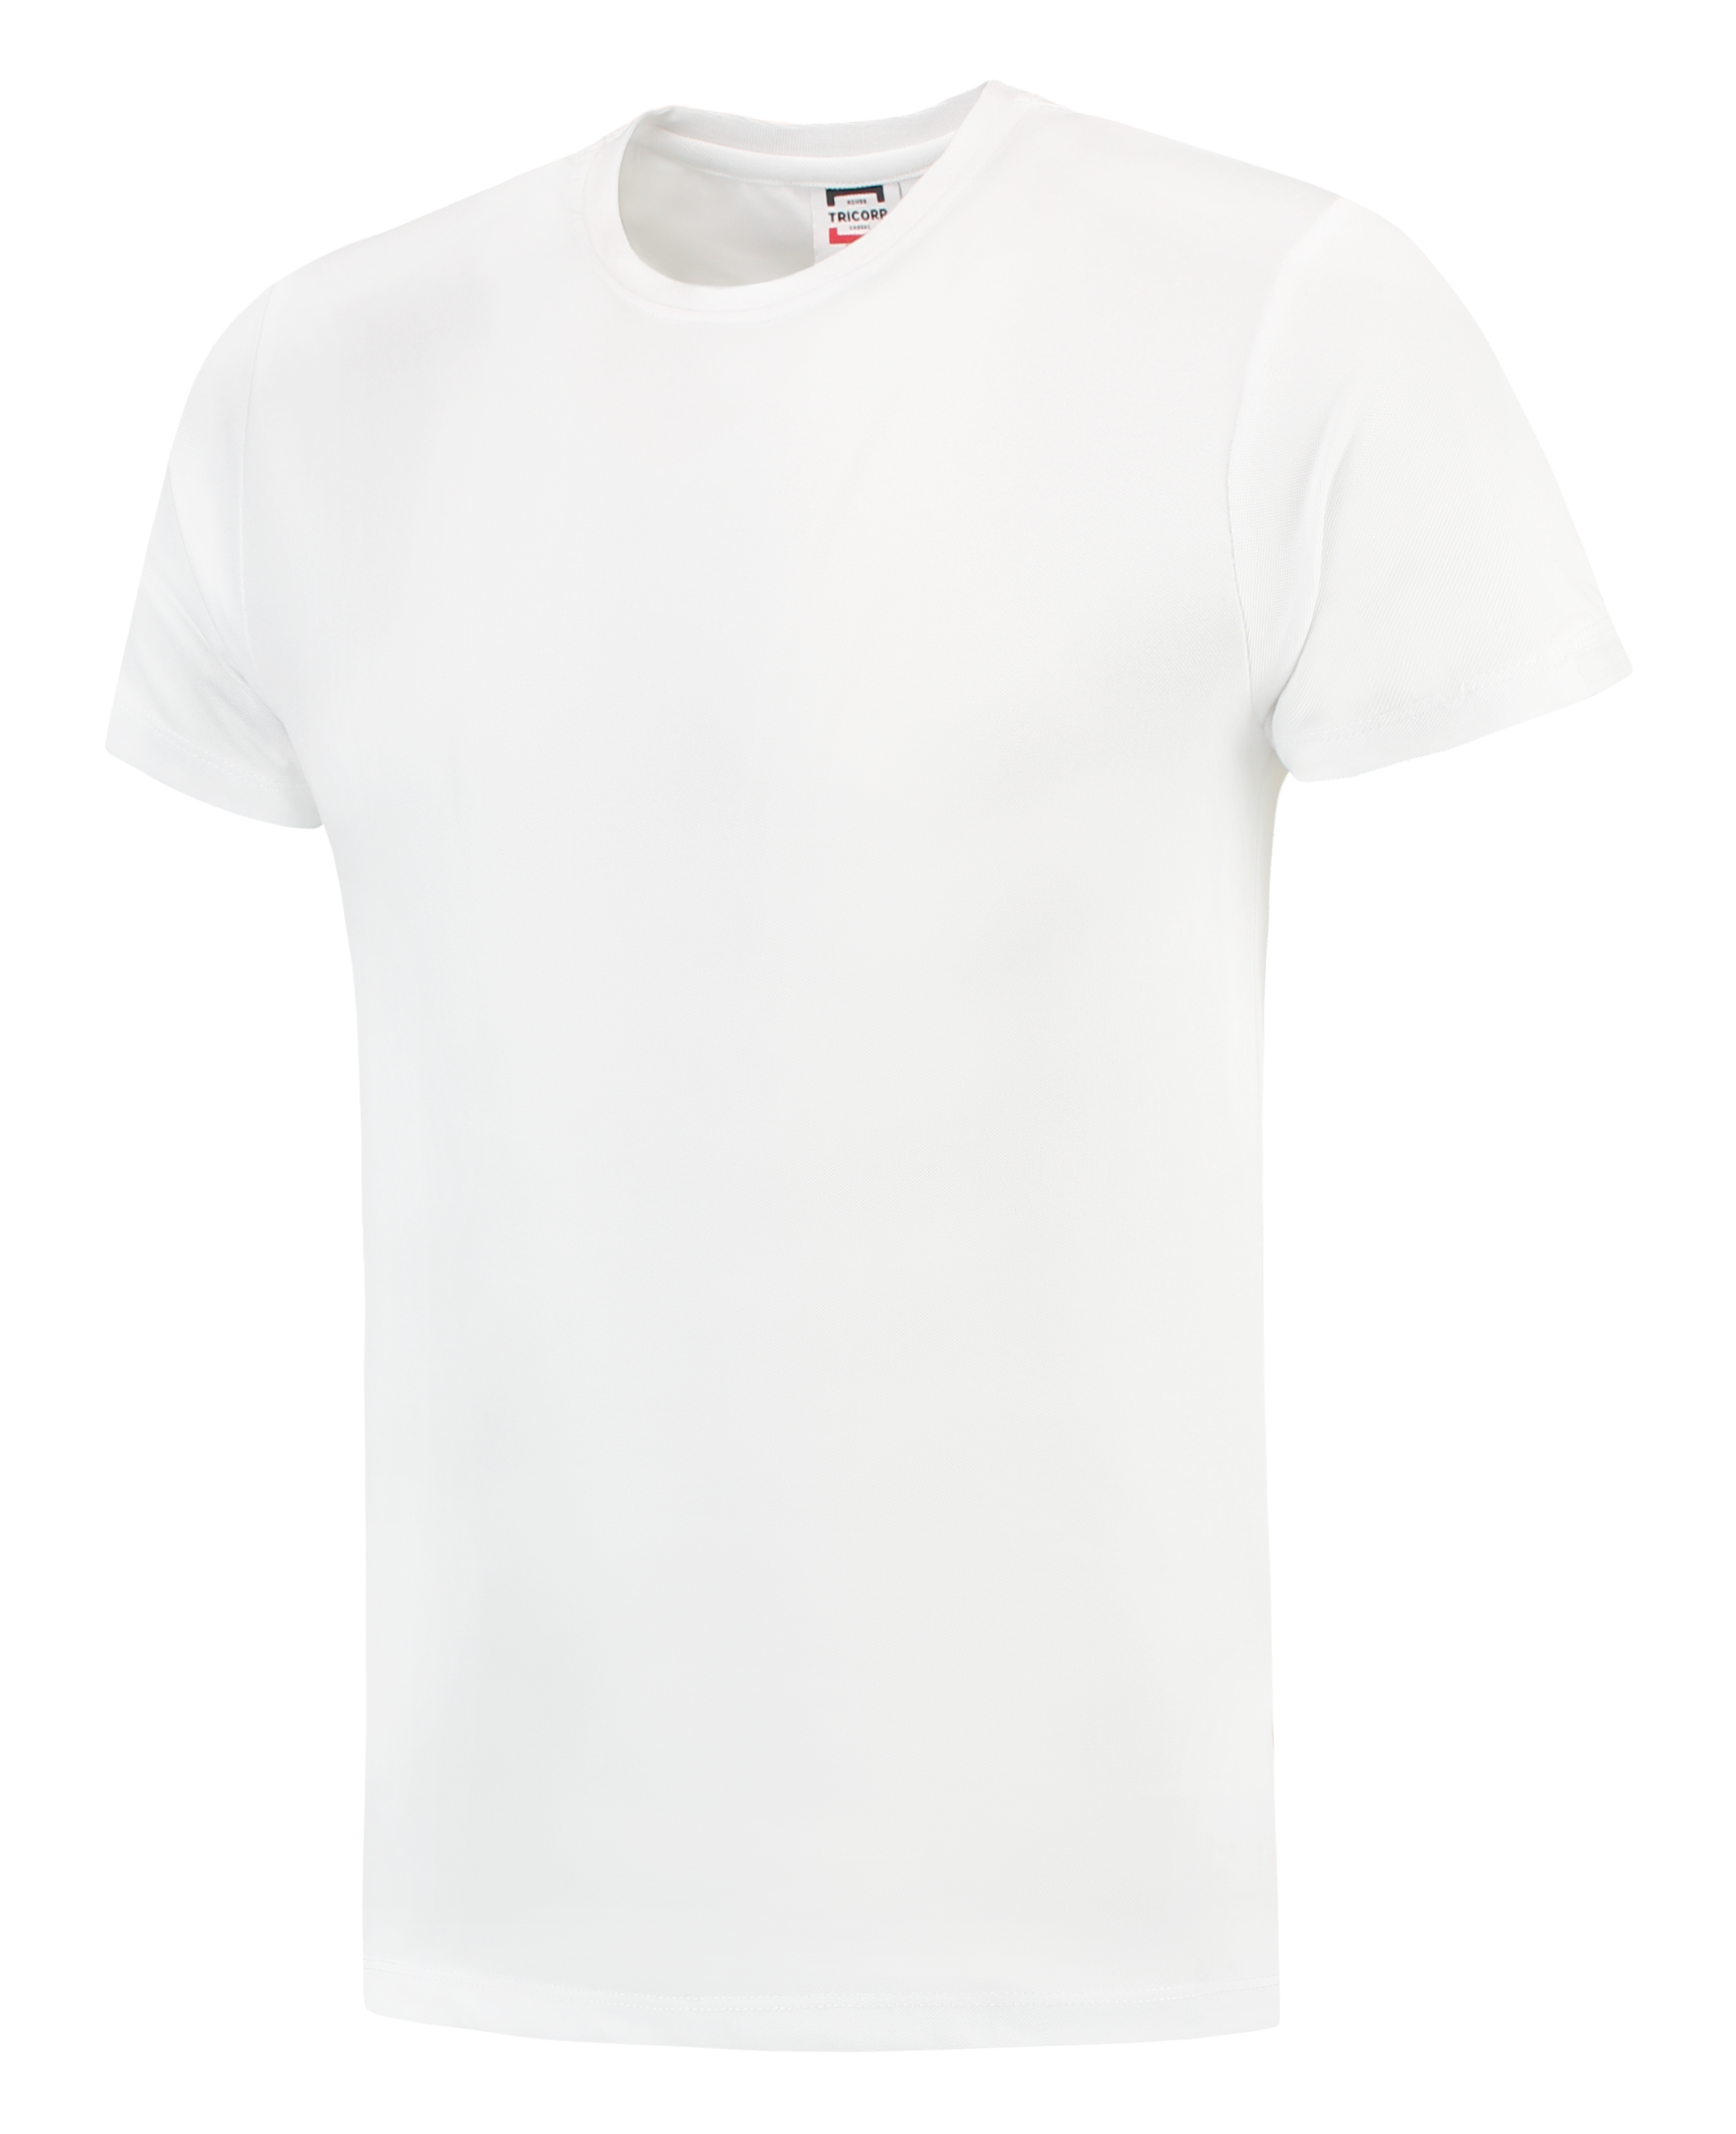 Tricorp T-Shirt Cooldry Slim Fit